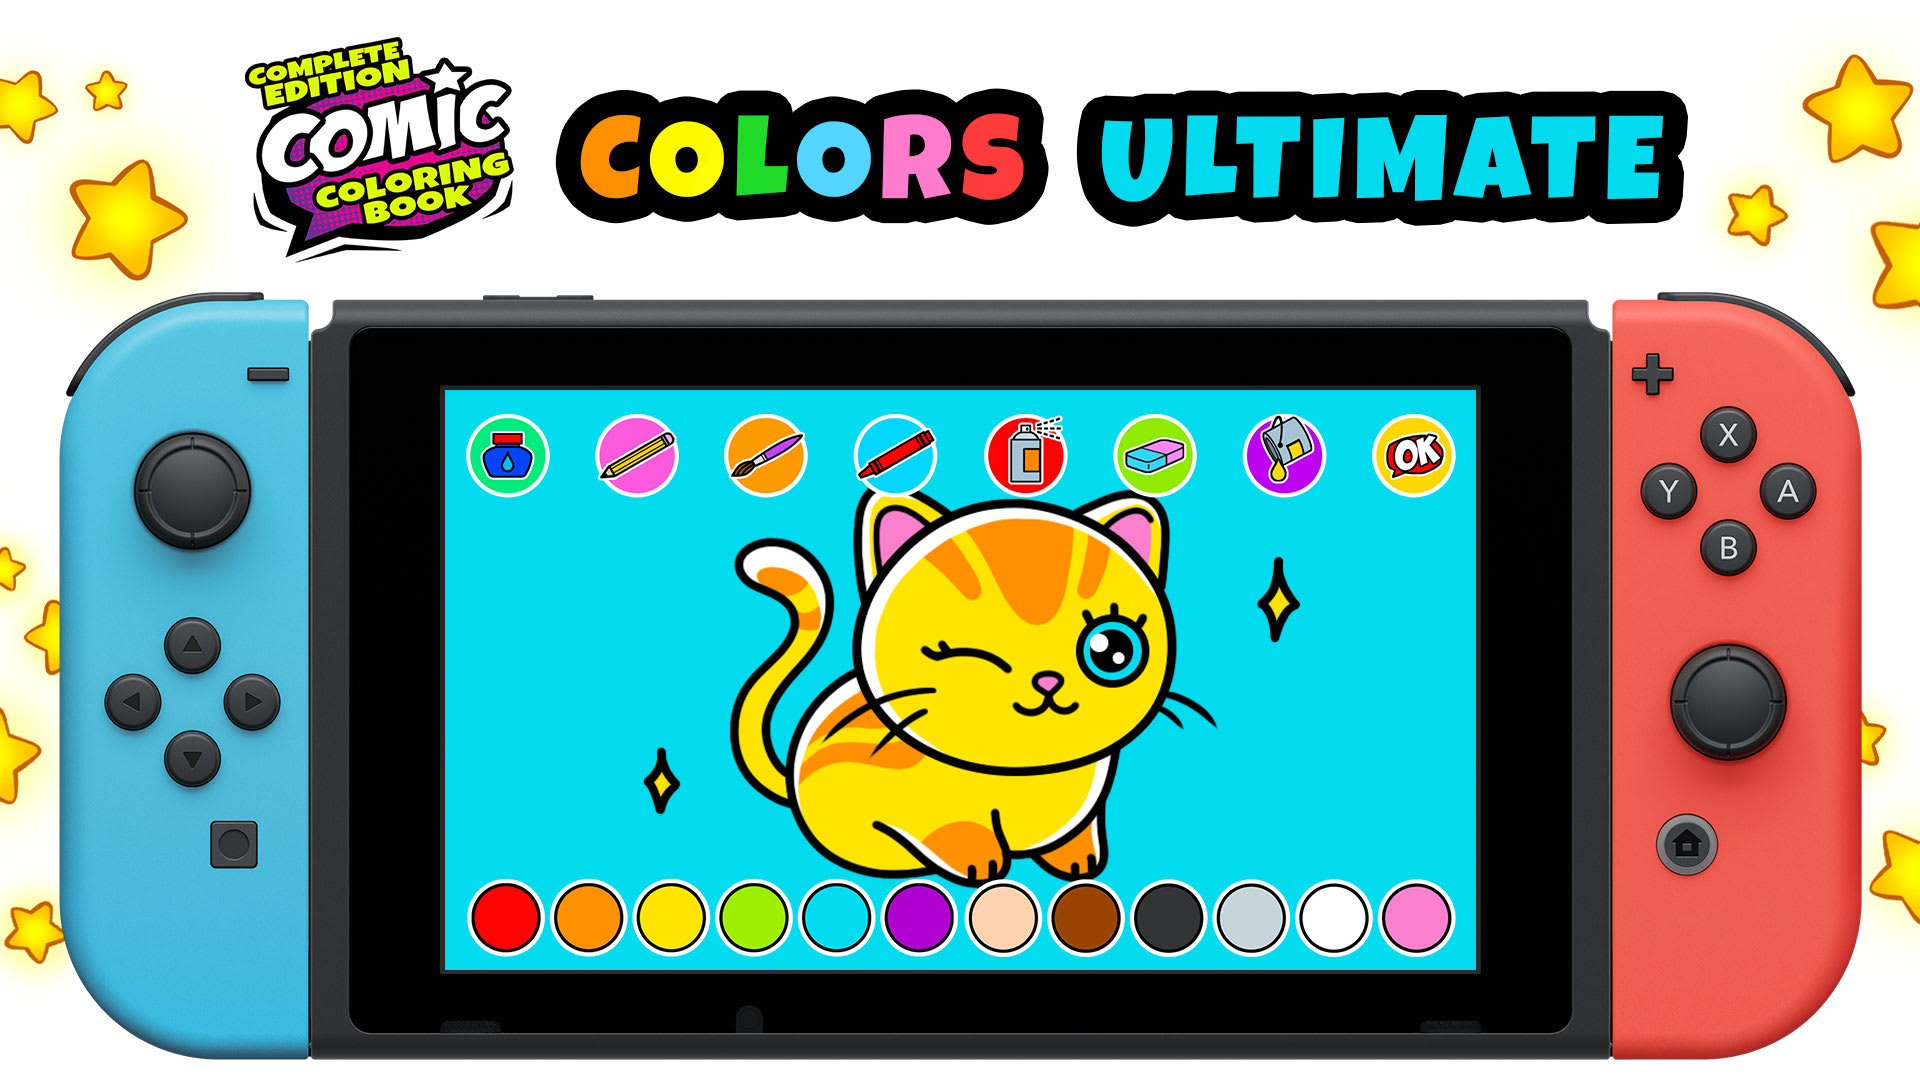 Comic Coloring Book Complete Edition: COLORS Ultimate 1